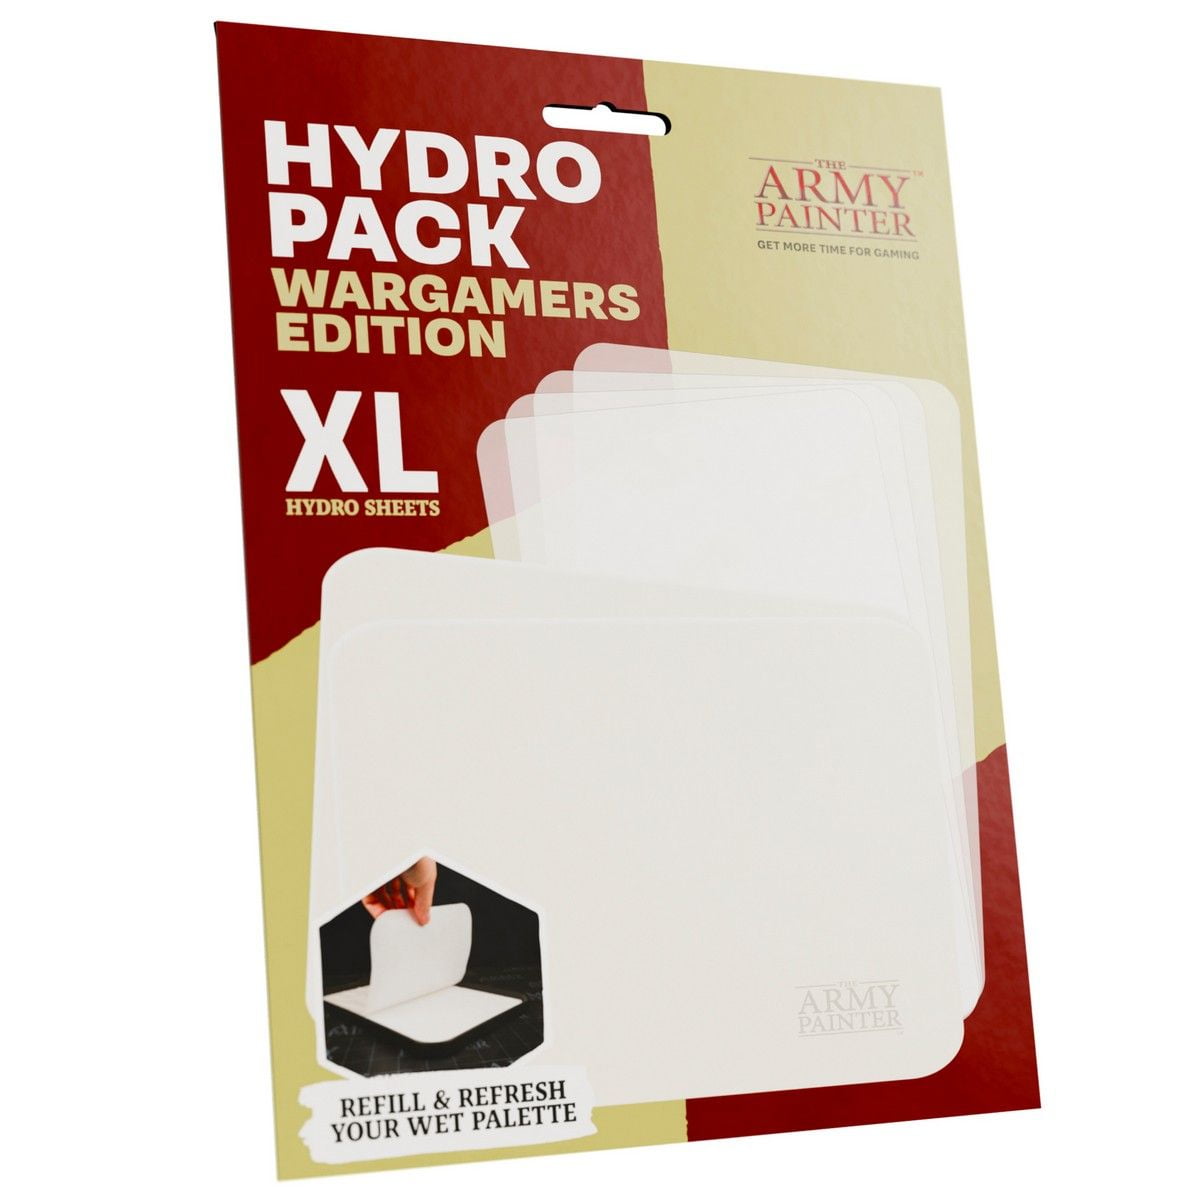 Hydro Pack Wargamers Edition